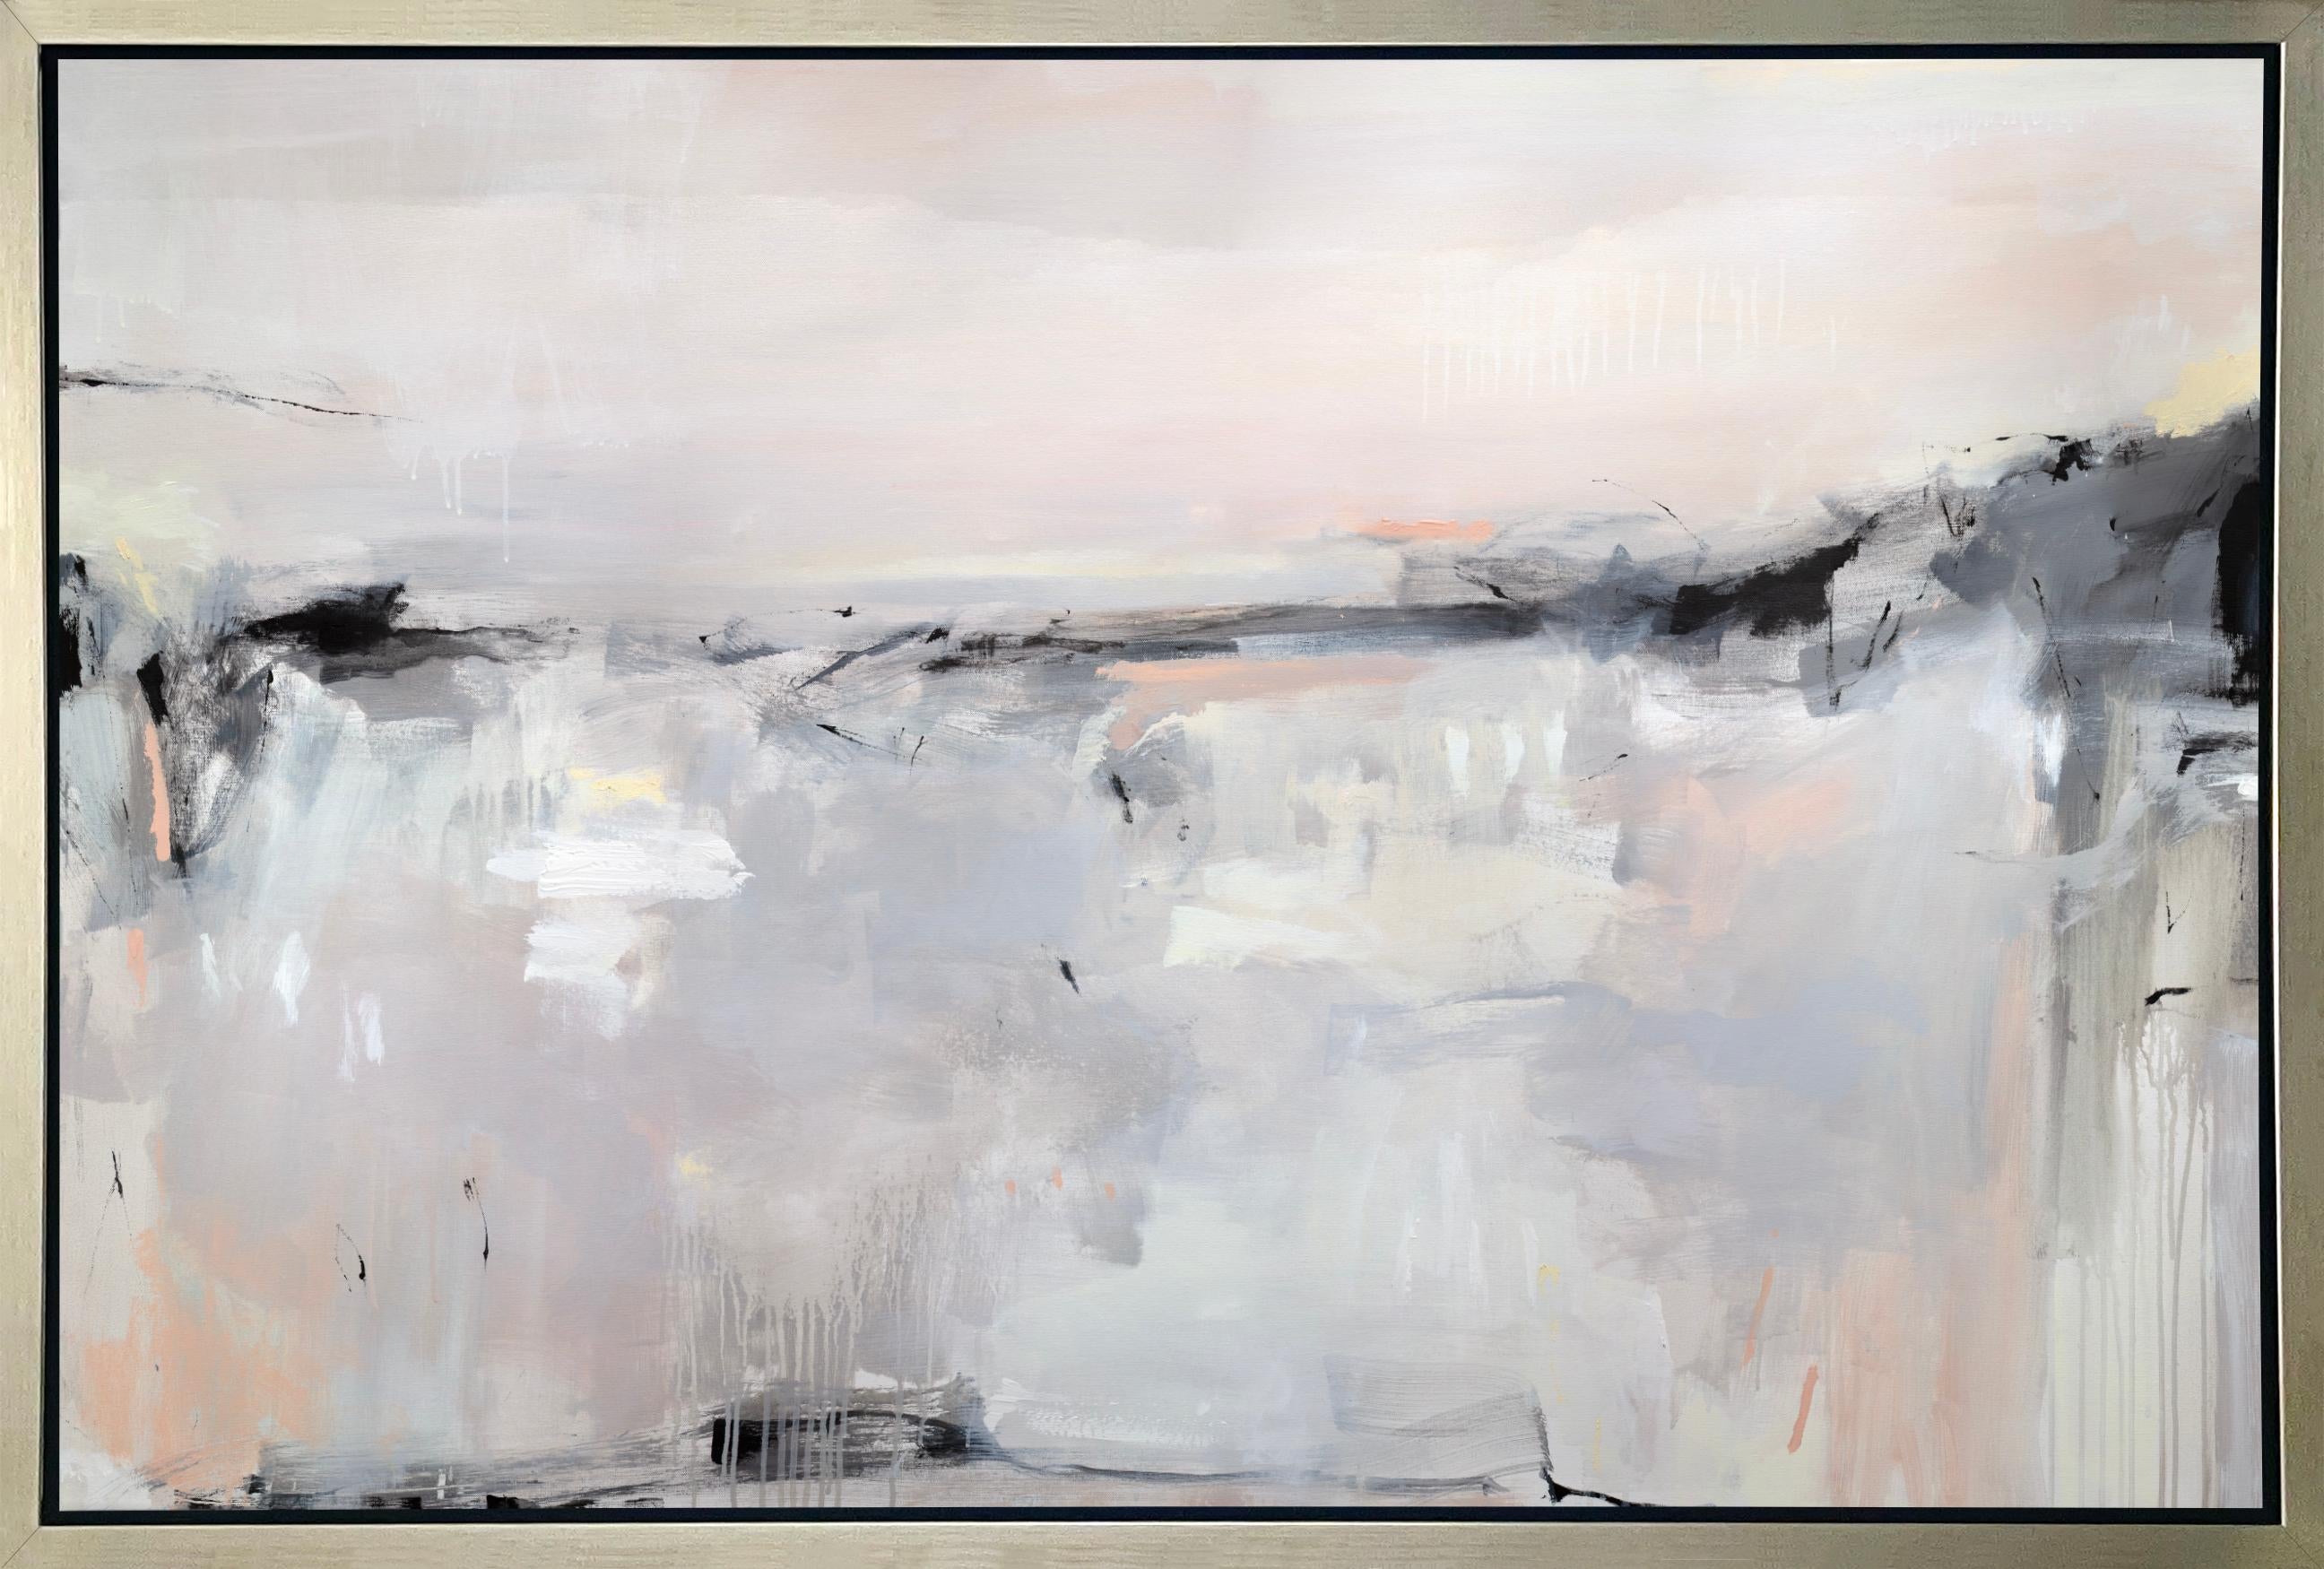 Kelly Rossetti Abstract Print - "Forever Roaming, " Framed Limited Edition Giclee Print, 48" x 72"